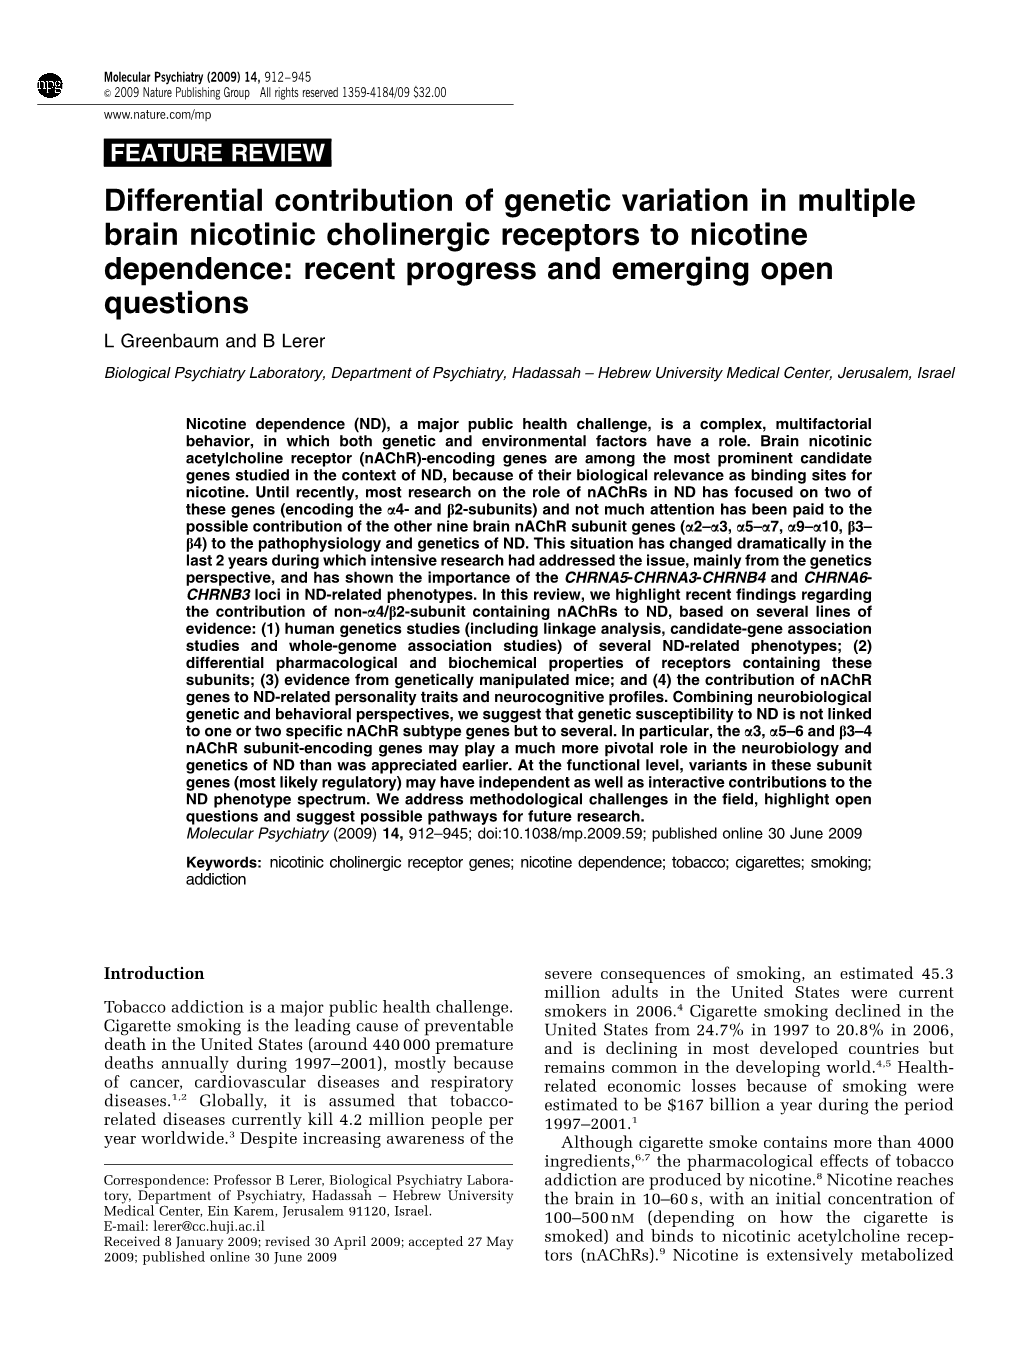 Differential Contribution of Genetic Variation in Multiple Brain